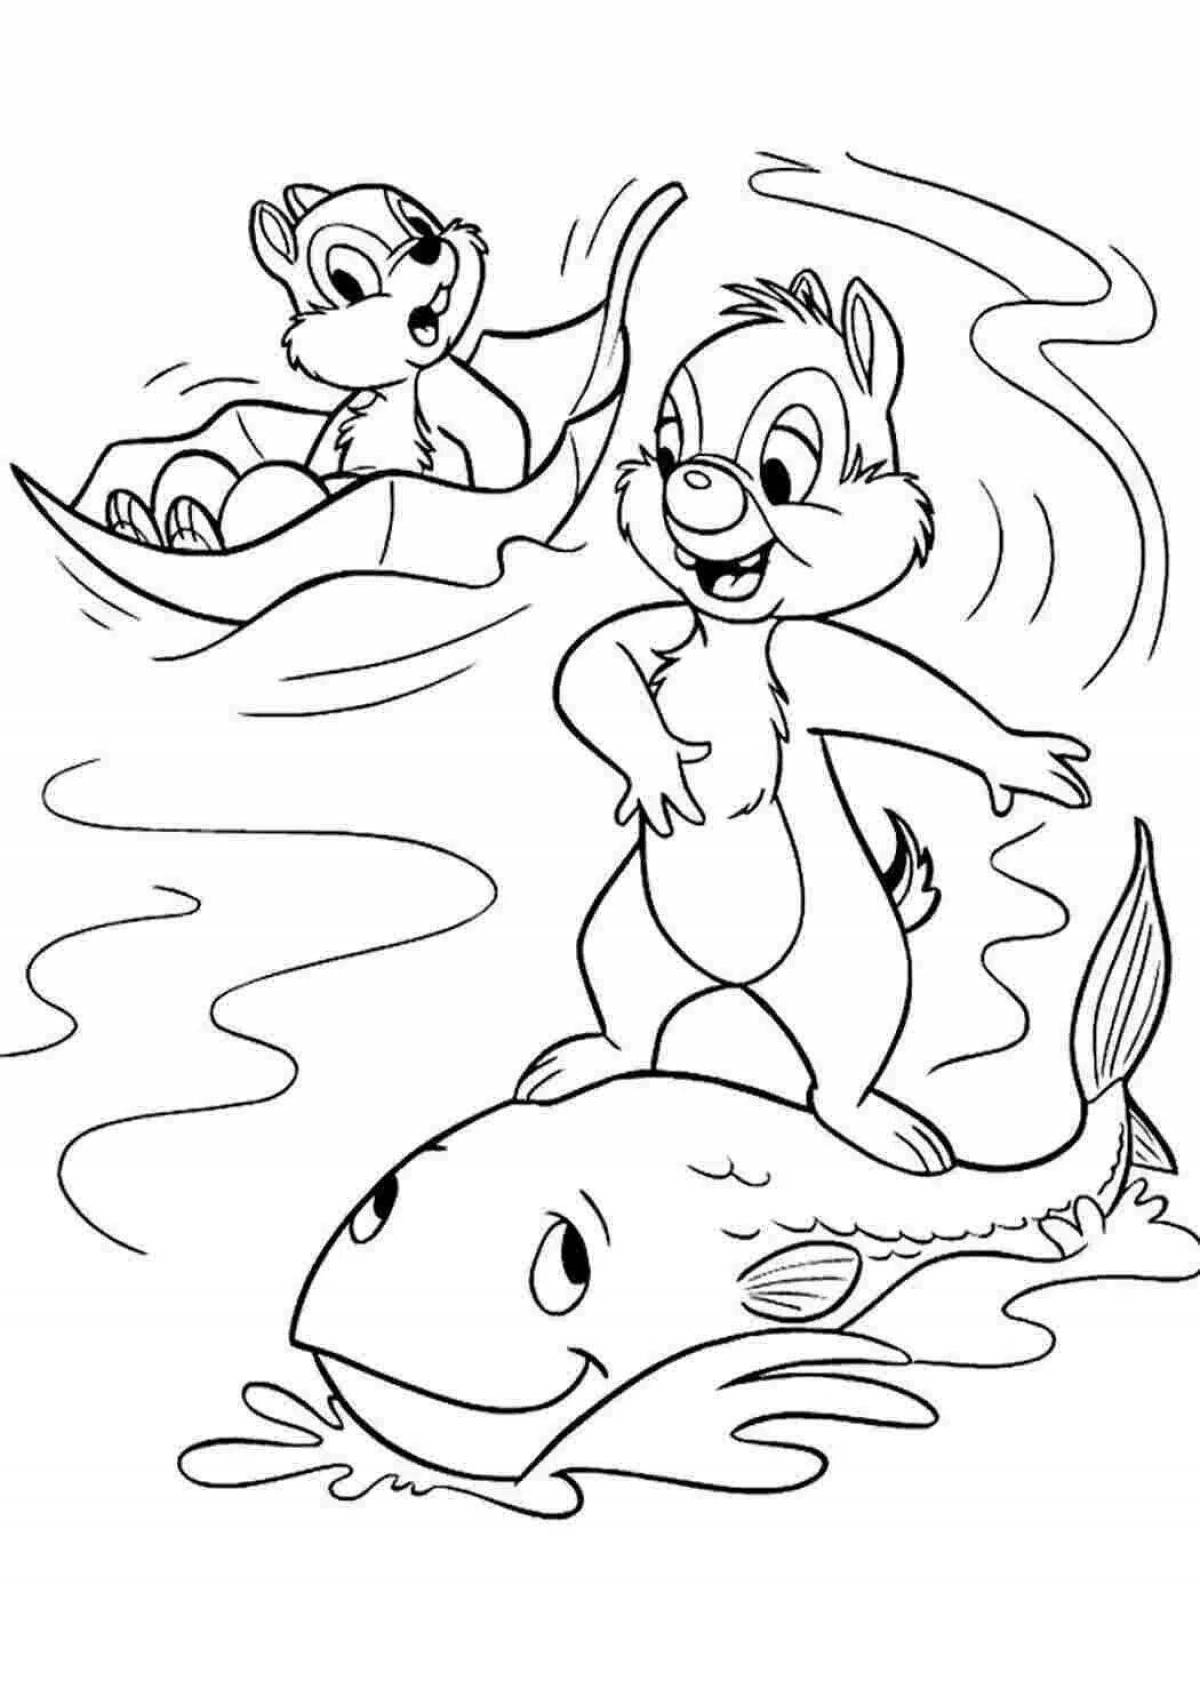 Chip and Dale Rescue Rescue coloring page